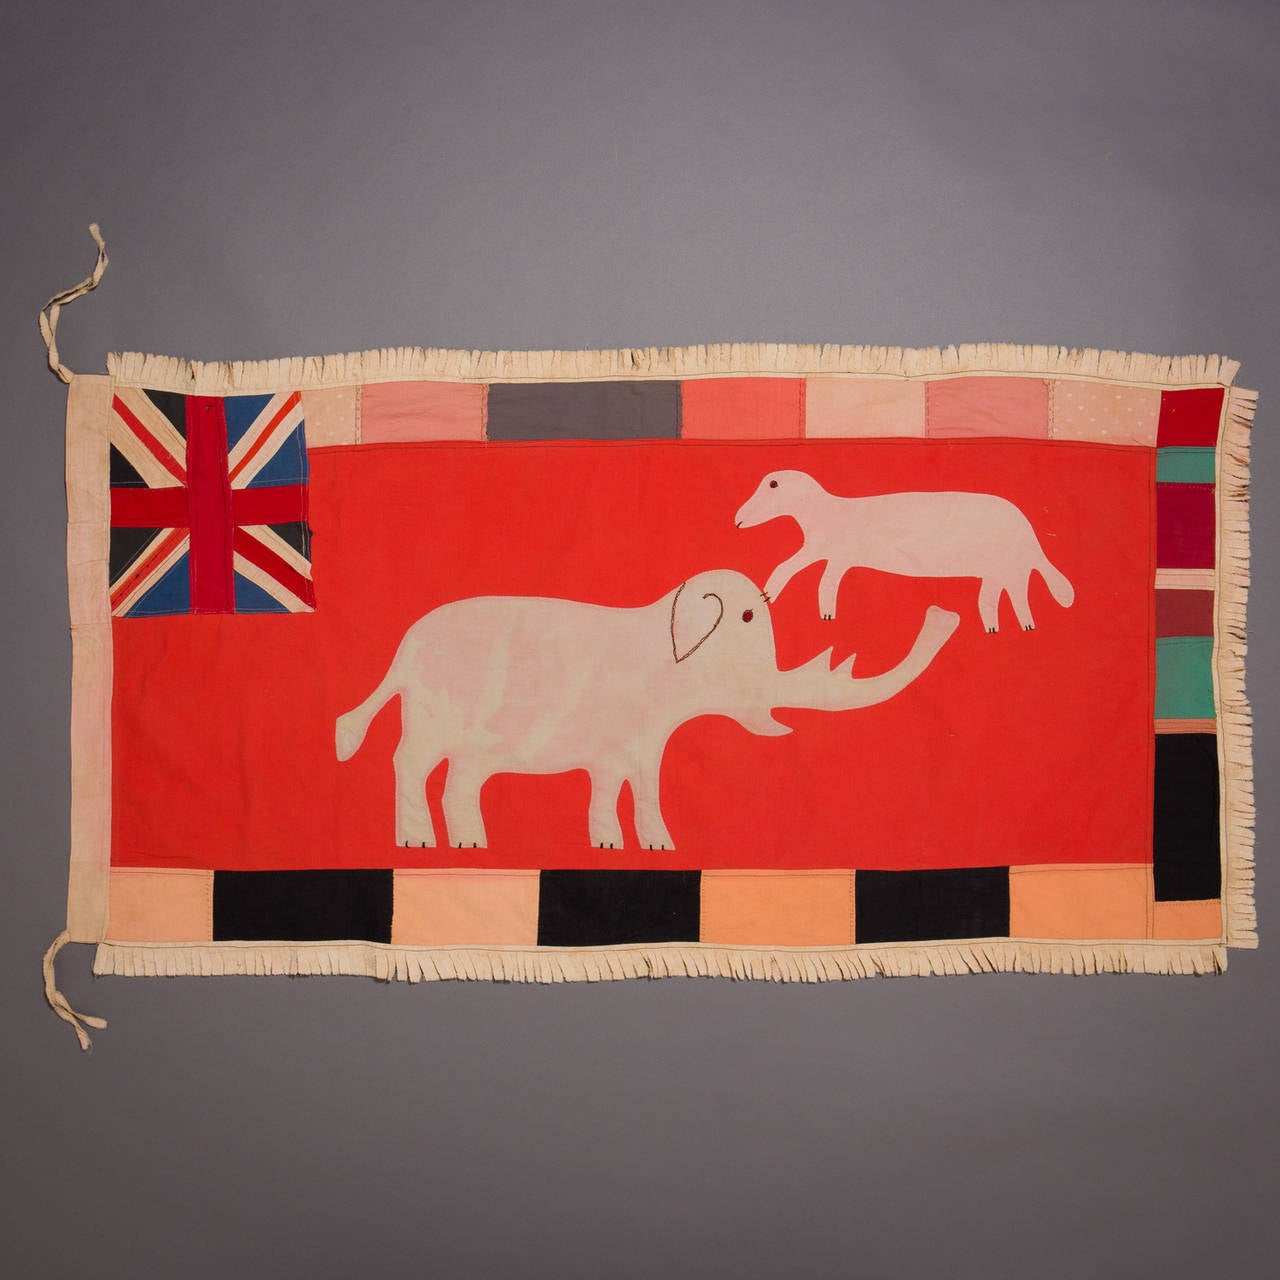 A large and graphically stunning asafo flag.

Fante flags represent the merger of two cultural traditions, the Akan tradition of combining proverbs with visual imagery, and the European heraldic tradition, which used flags and banners displaying